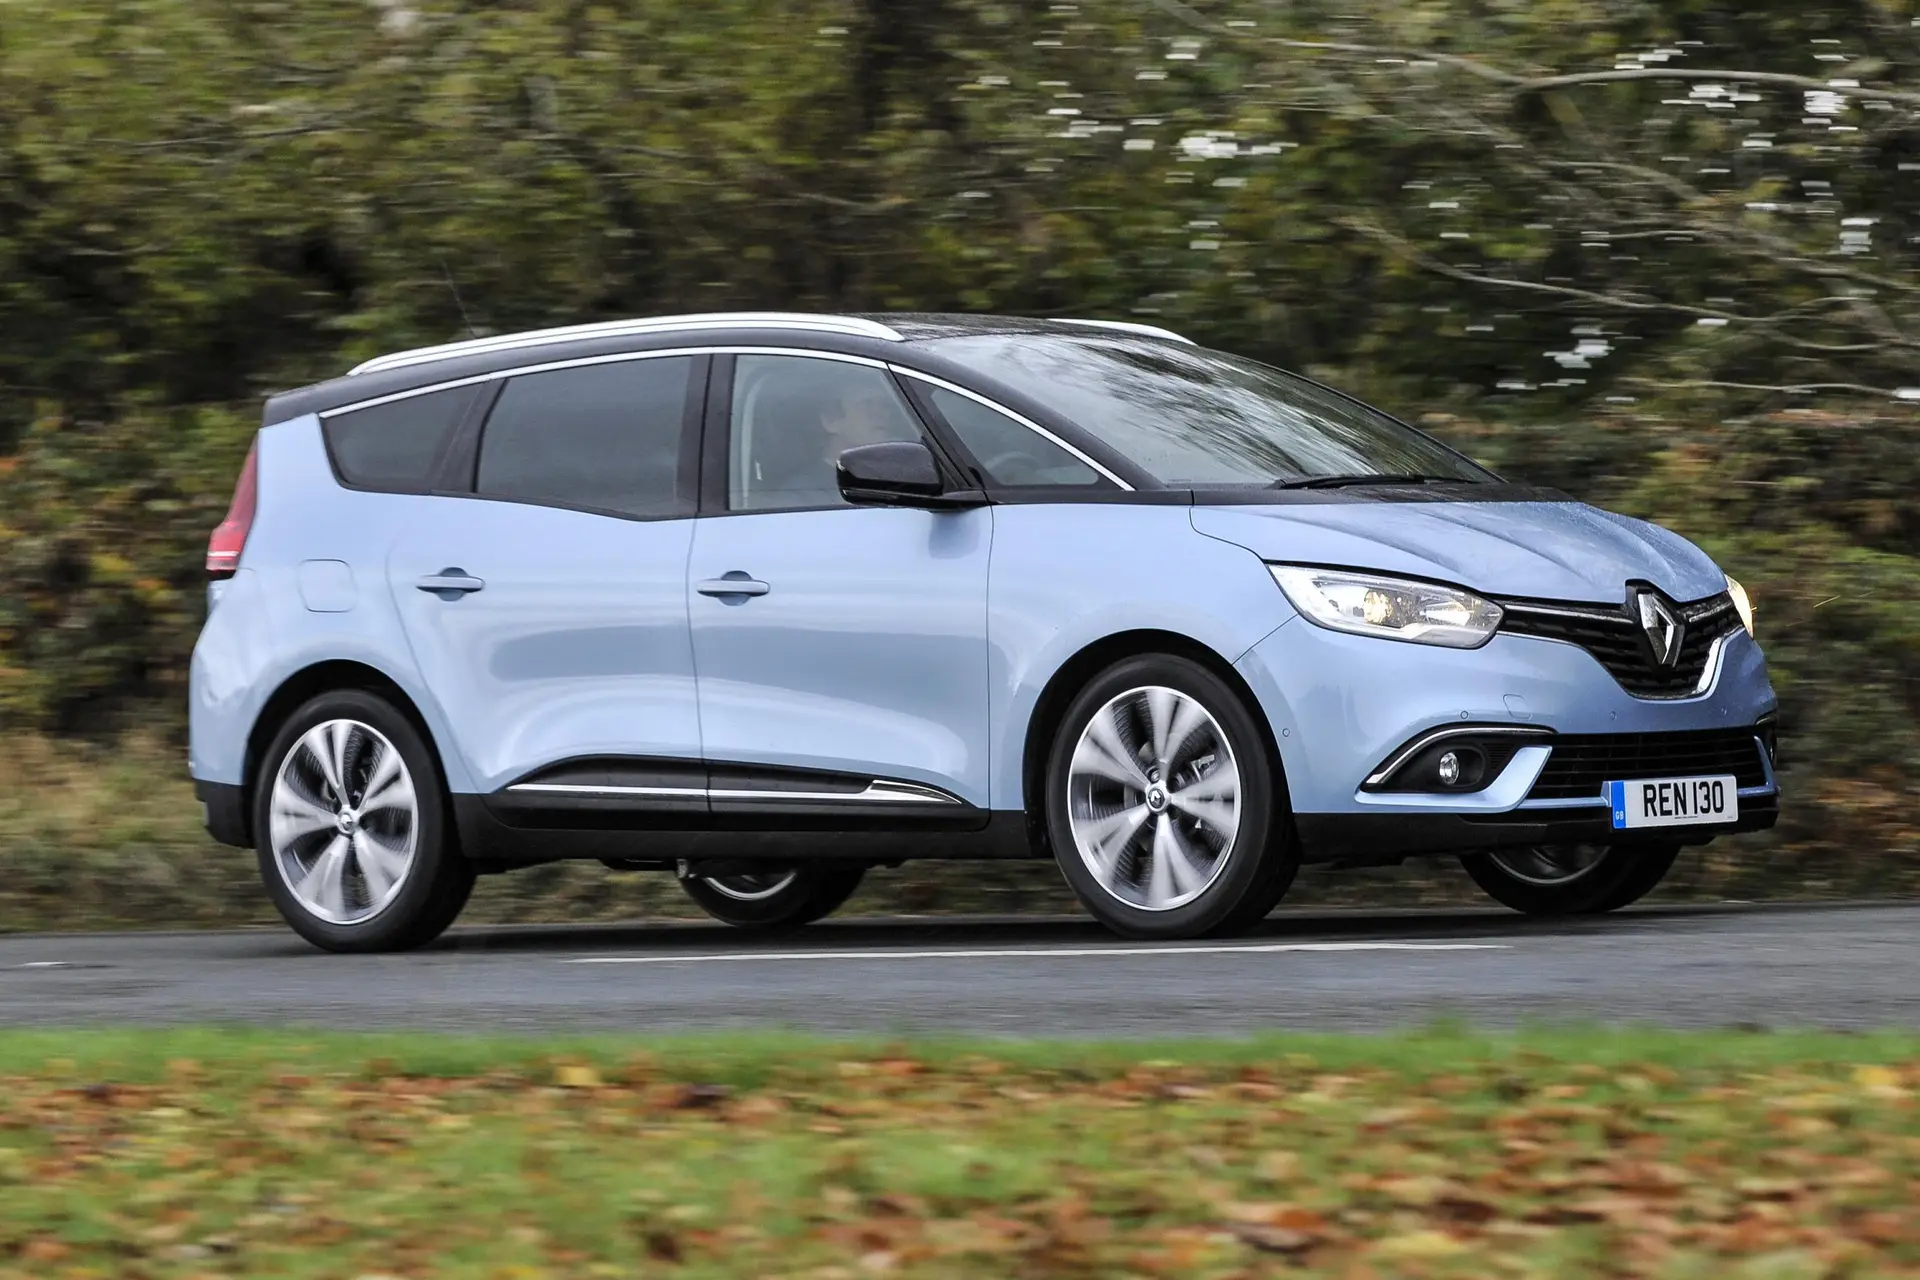 Renault Grand Scenic (2016-2002) Review: exterior front three quarter photo of the Renault Grand Scenic on the road